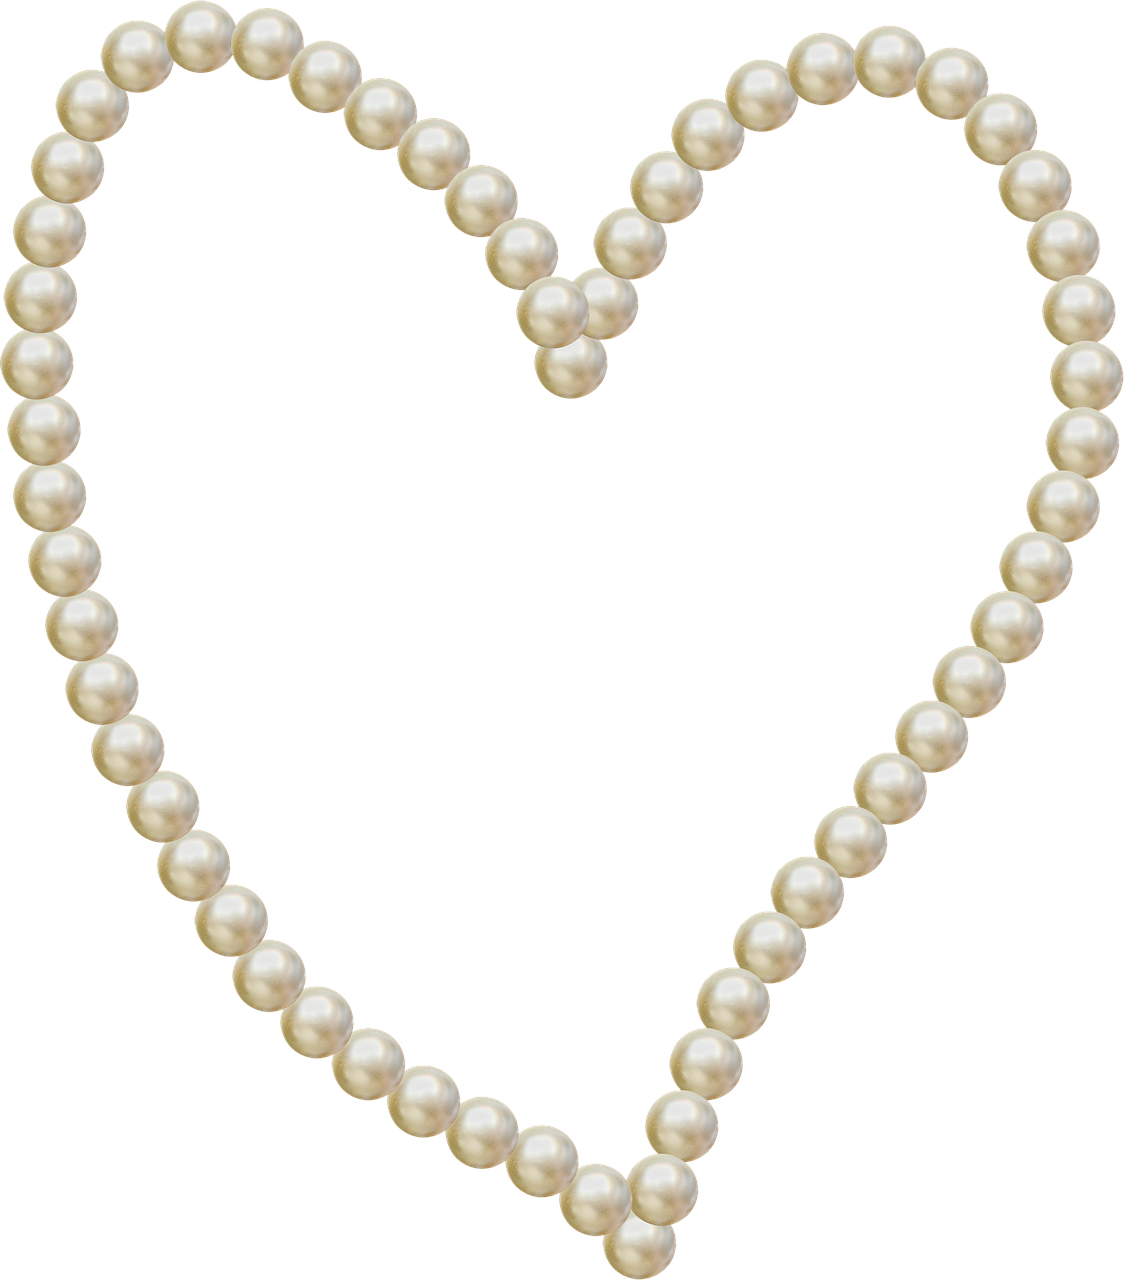 heart pearls frame free photo